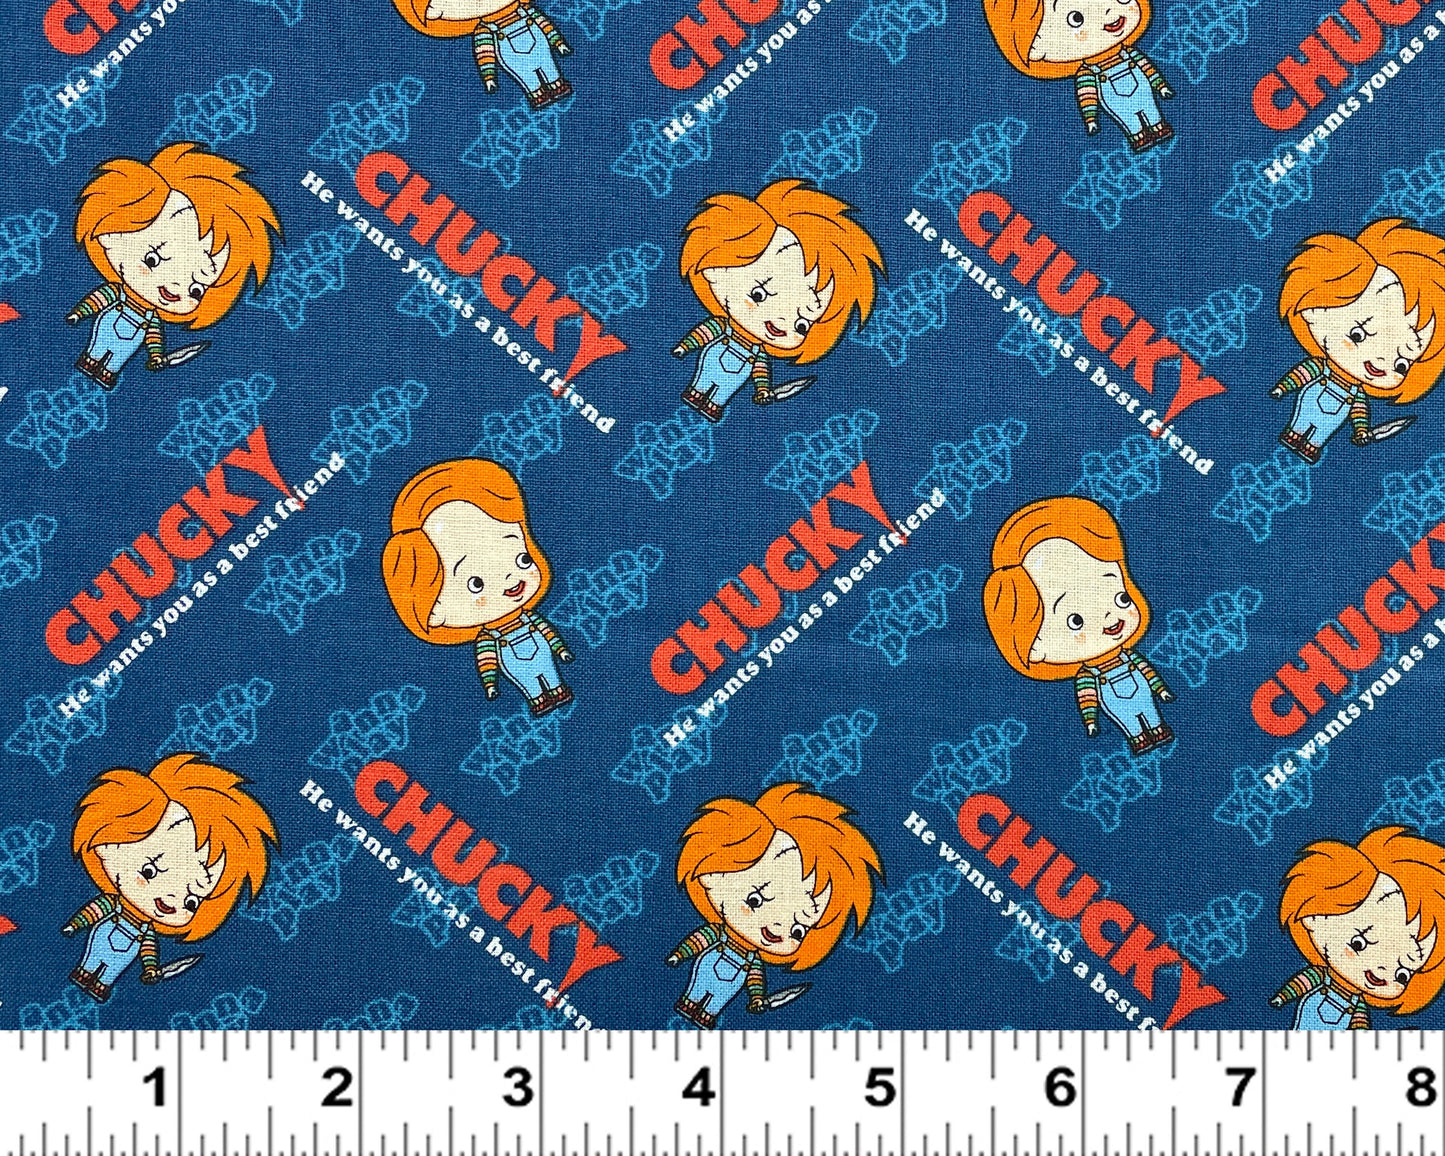 Chucky Fabric - 100% Cotton Fabric by the yard - Camelot Fabrics - Out of Print - Halloween fabric Best Friend Horror movie - Ships NEXT DAY